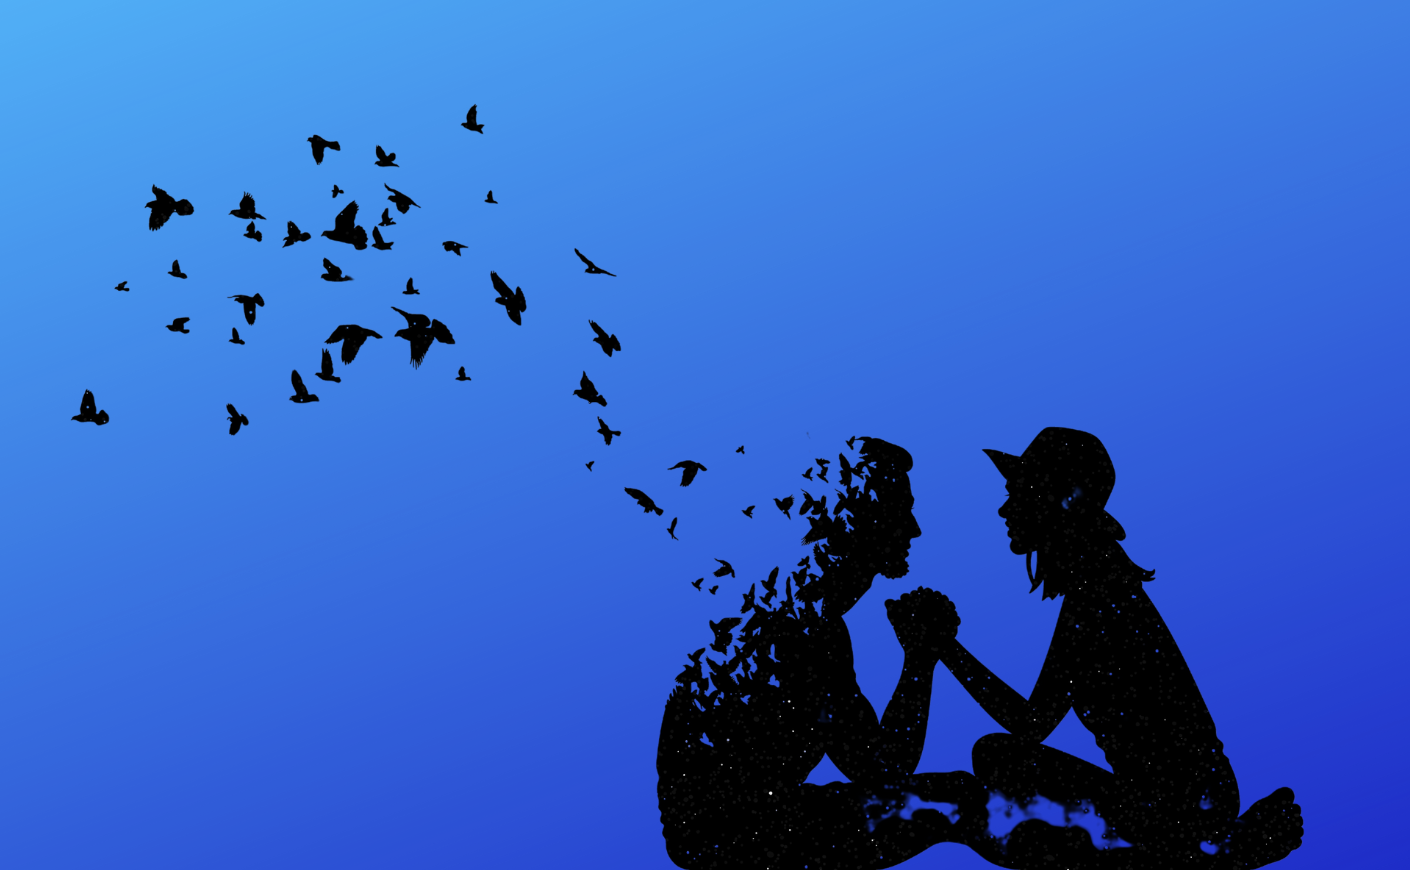 Silhouette of a woman and a man holding hands, with the hand turning into birds flying away